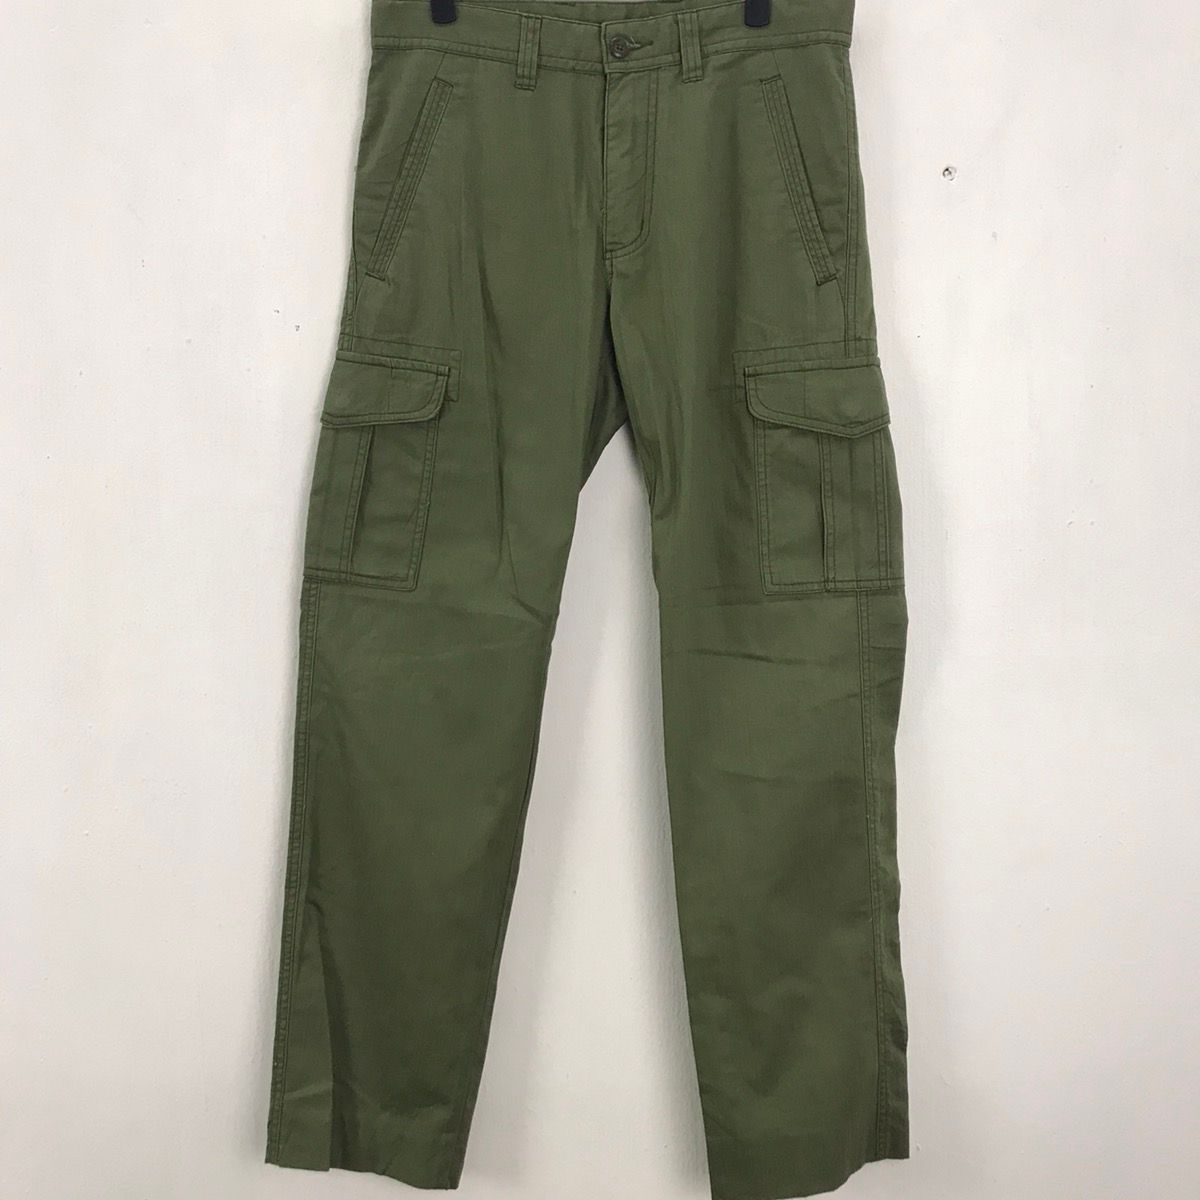 Japanese Brand Topvalu cargo tactical multipocket military Pants #0125 ...